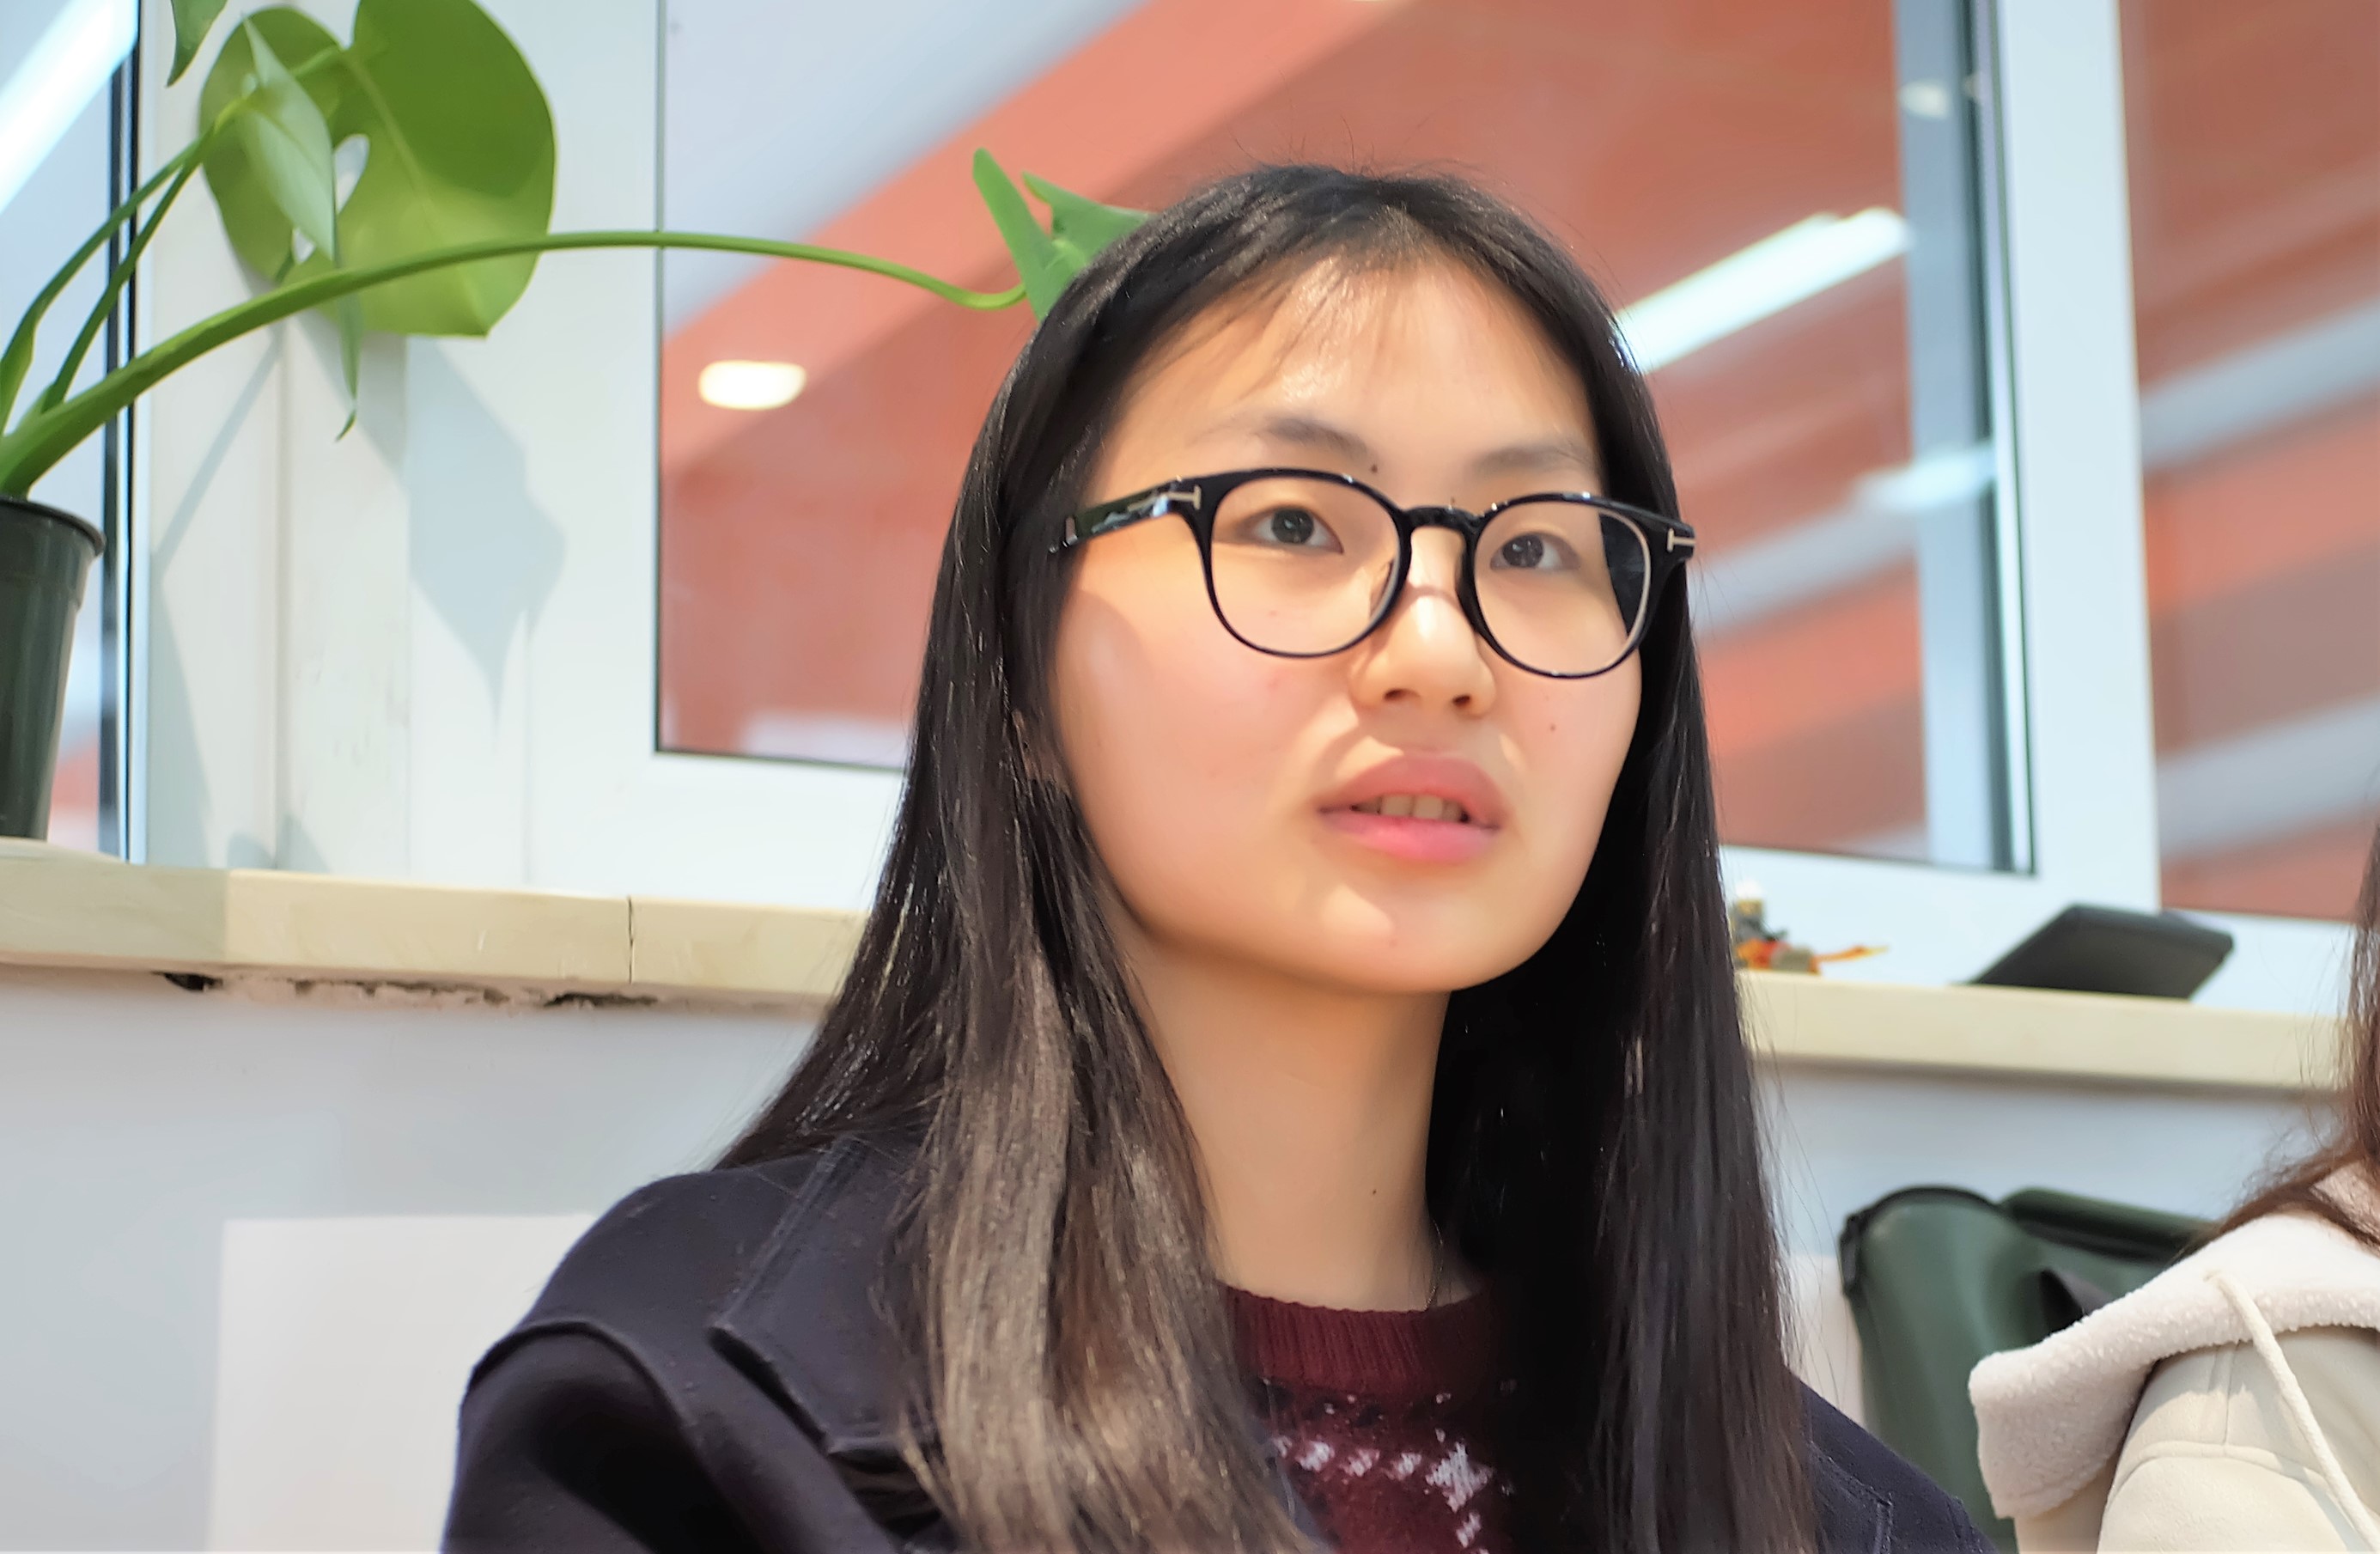 Ningbo student is on journey of self-discovery